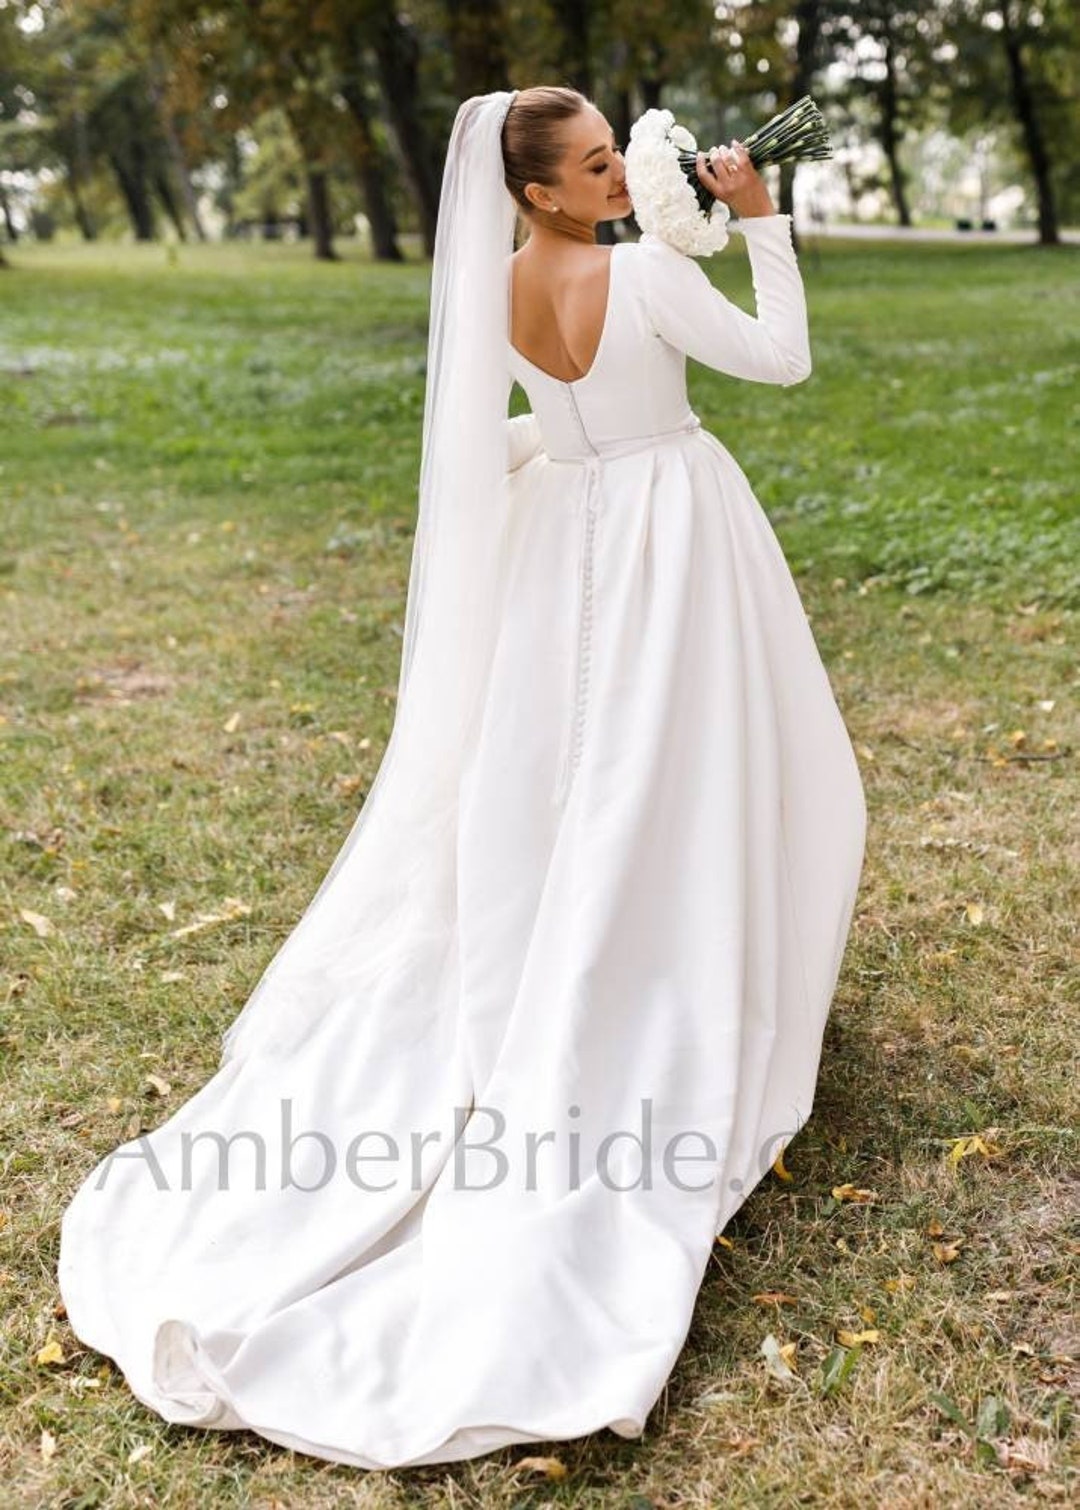 White Casual Wedding Dress Satin Fabric Square Neck Long Sleeves A